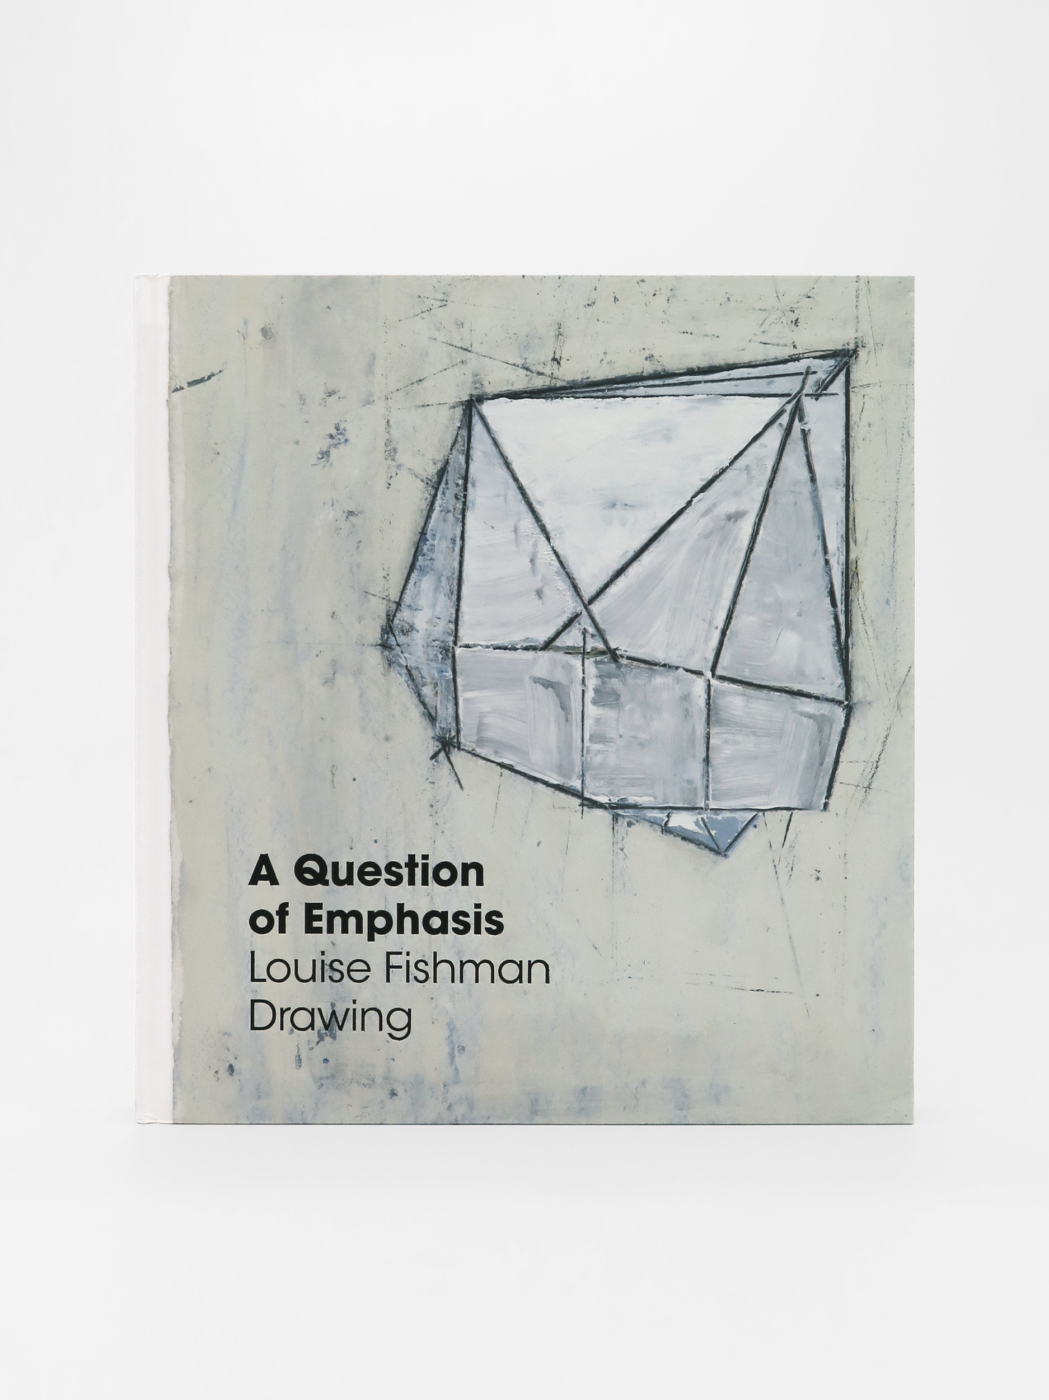 Louise Fishman, A Question of Emphasis